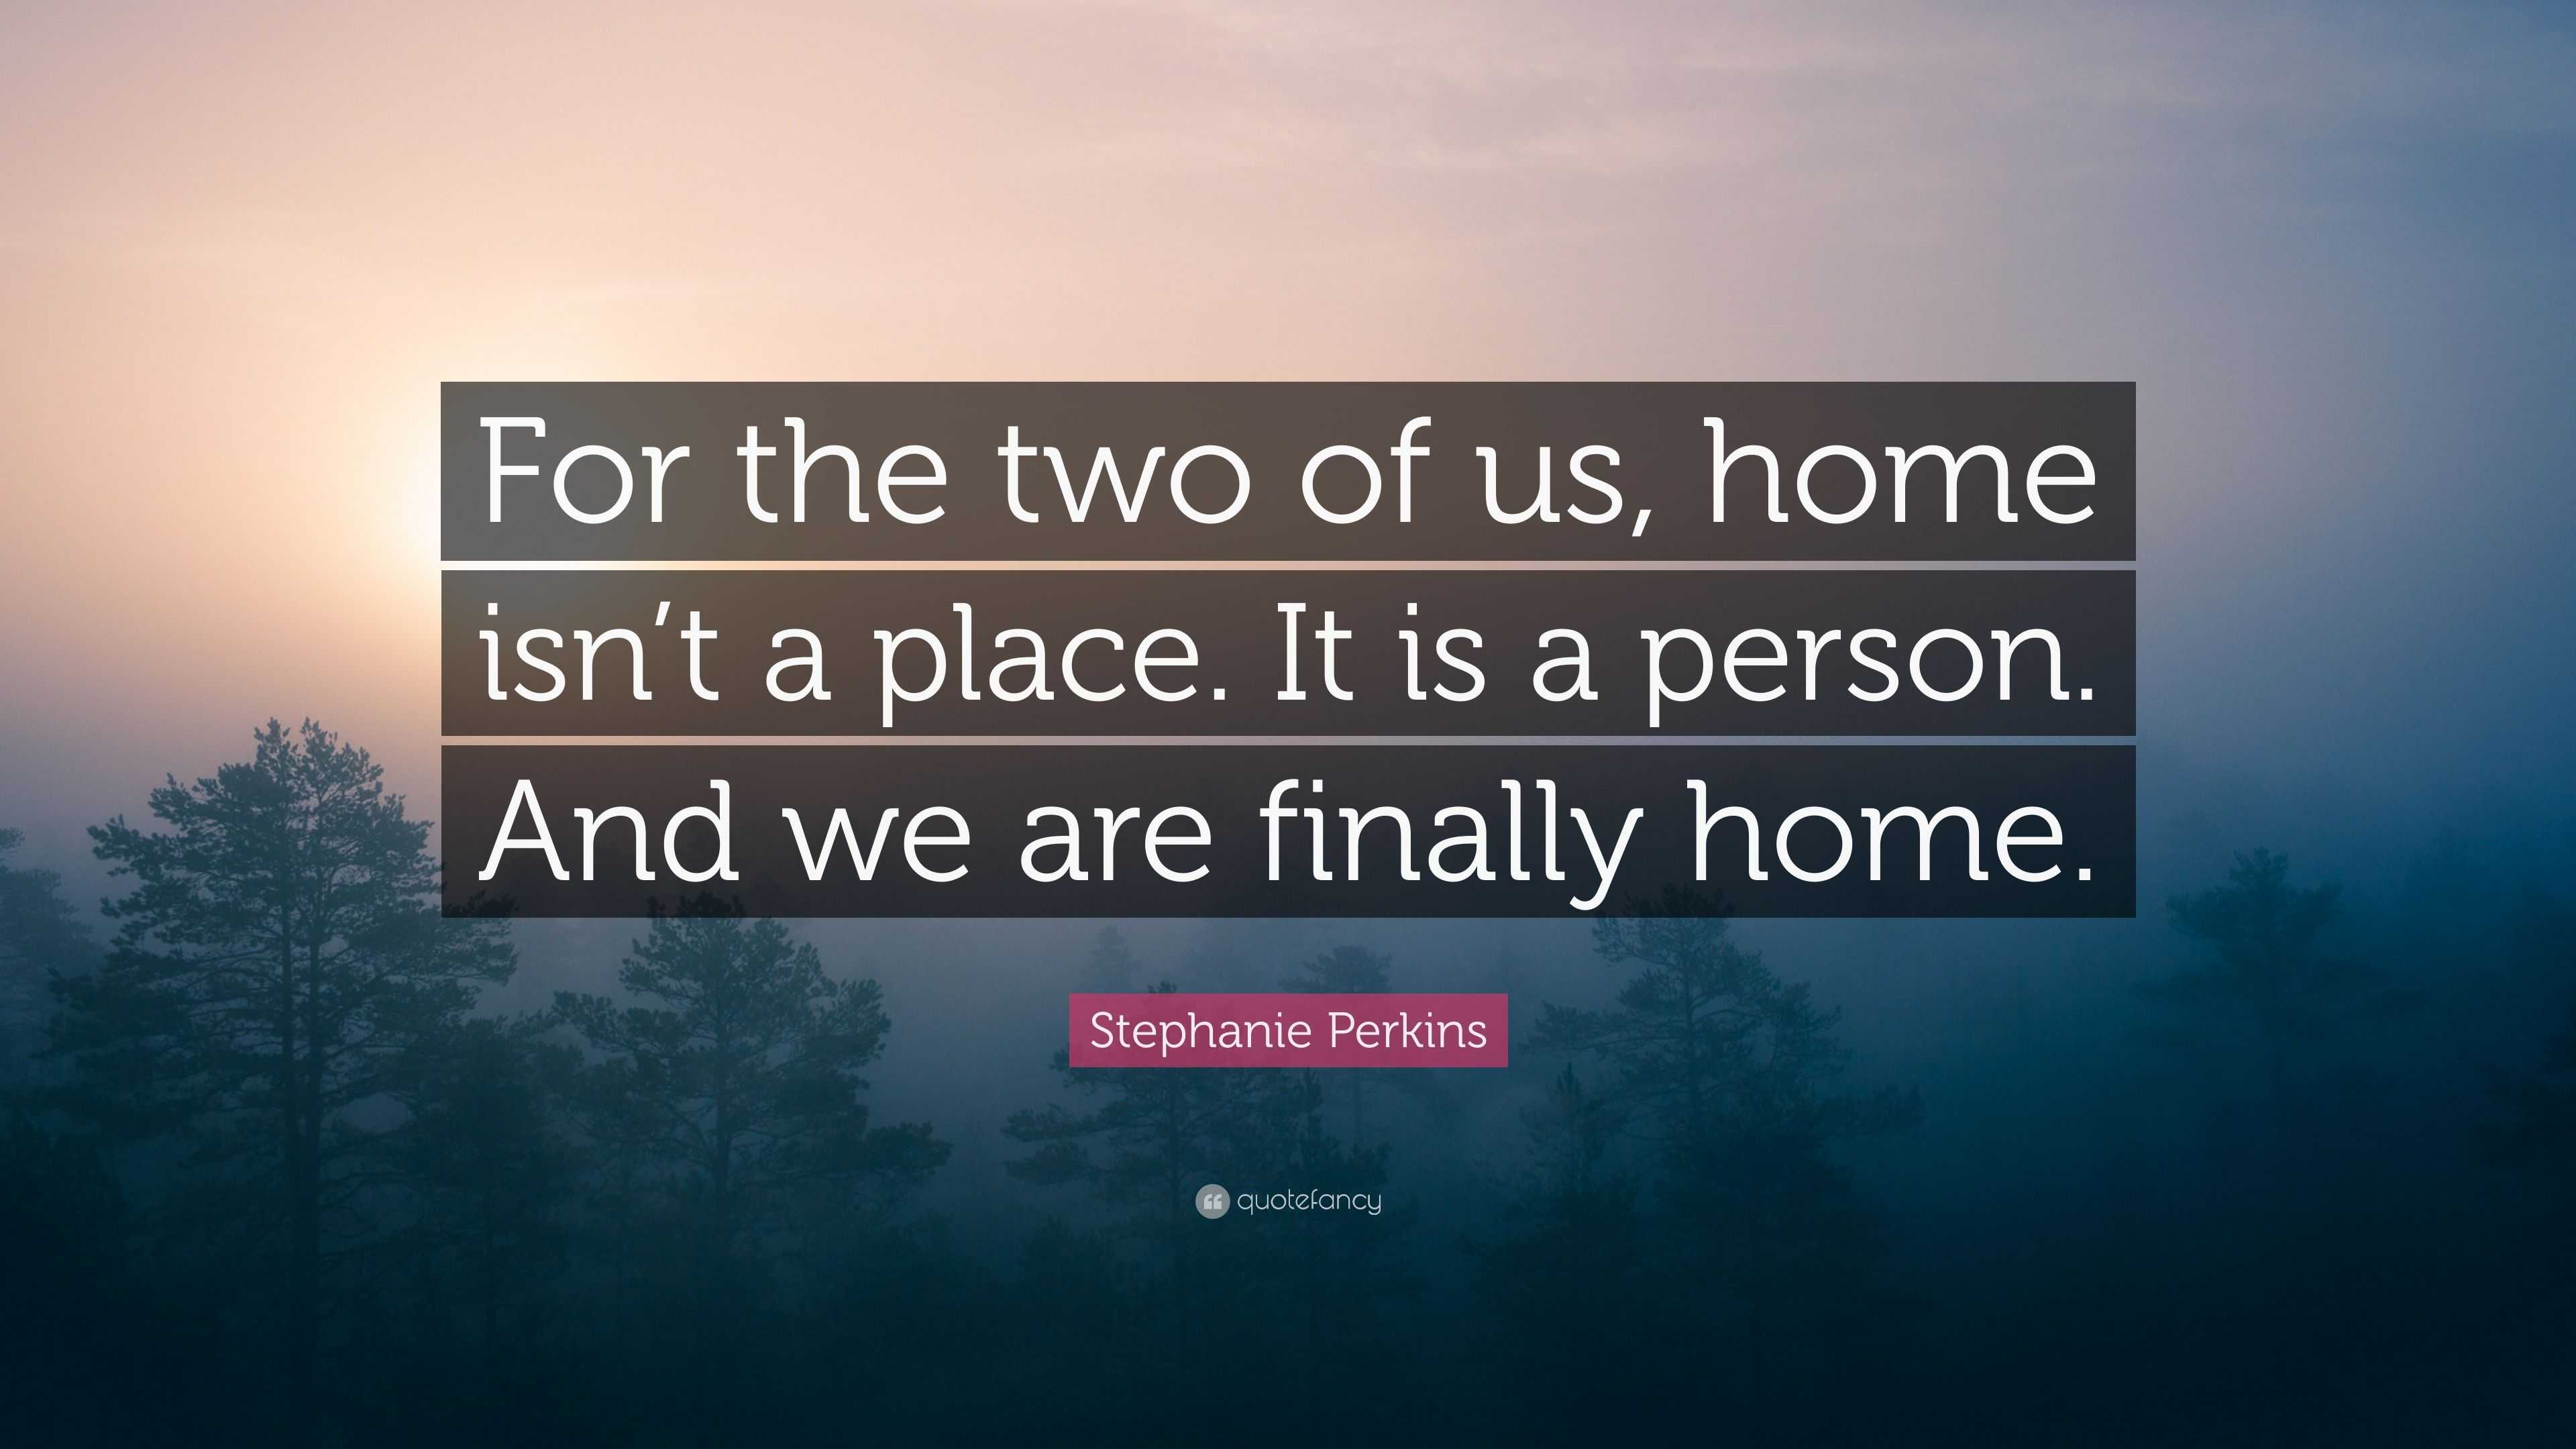 Stephanie Perkins Quote: “For the two of us, home isn’t a place. It is ...